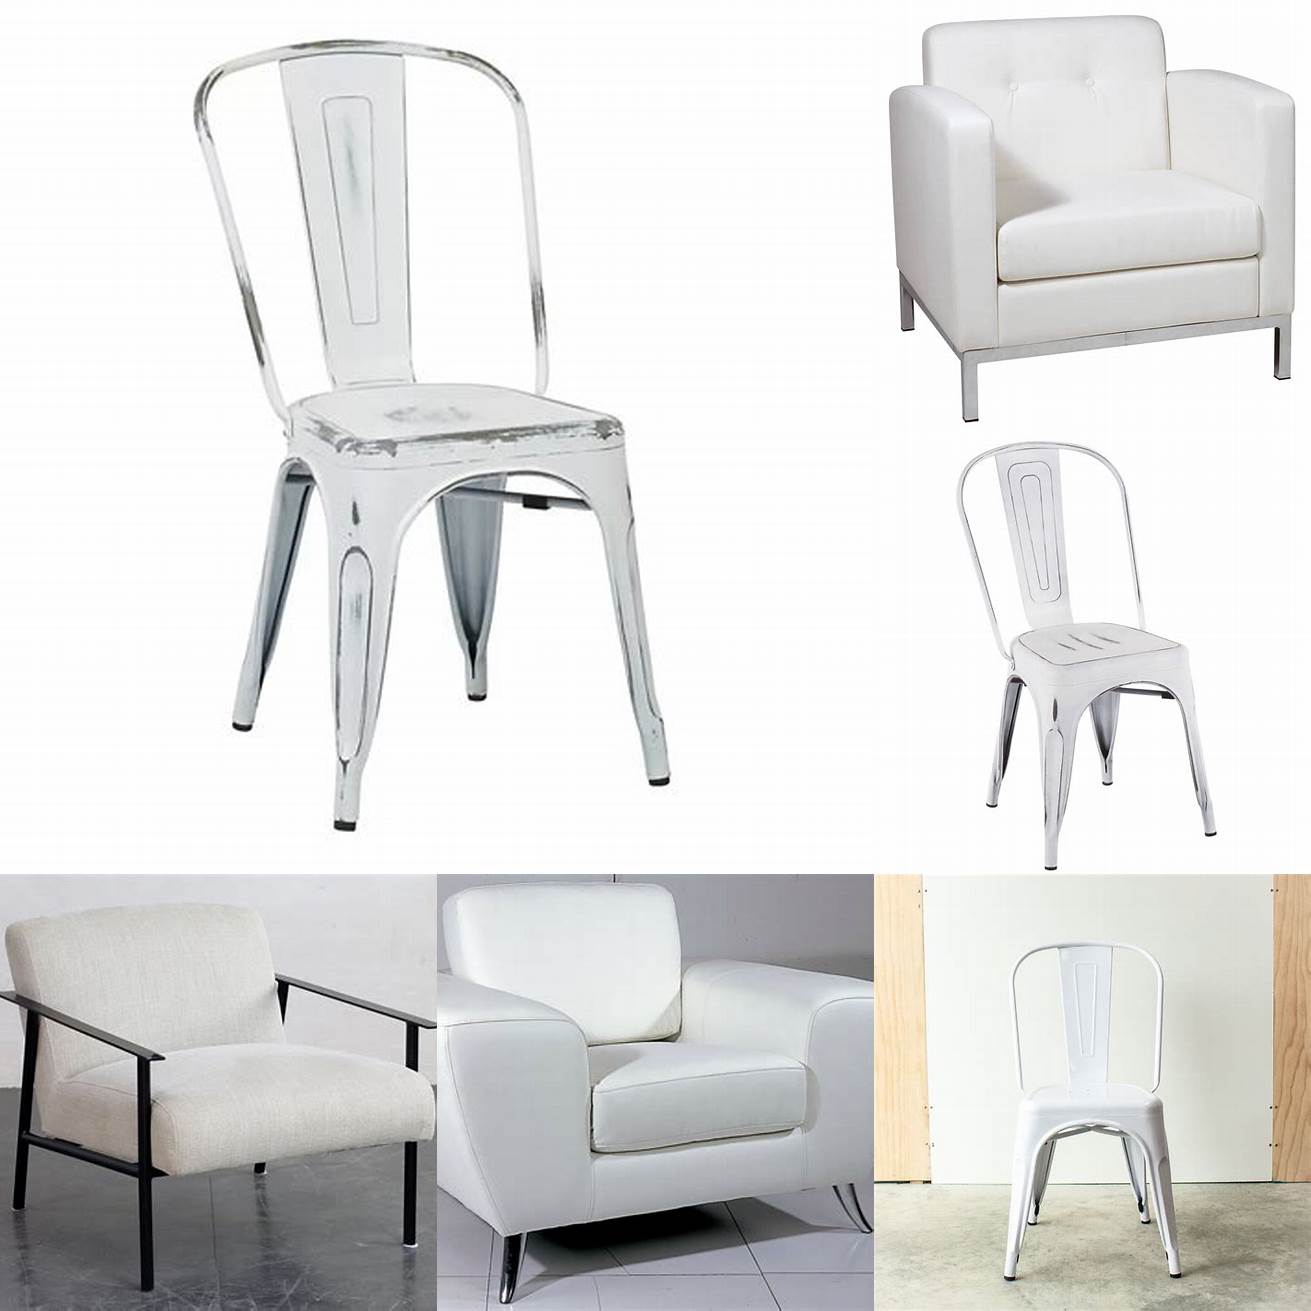 Modern white metal chairs with clean lines